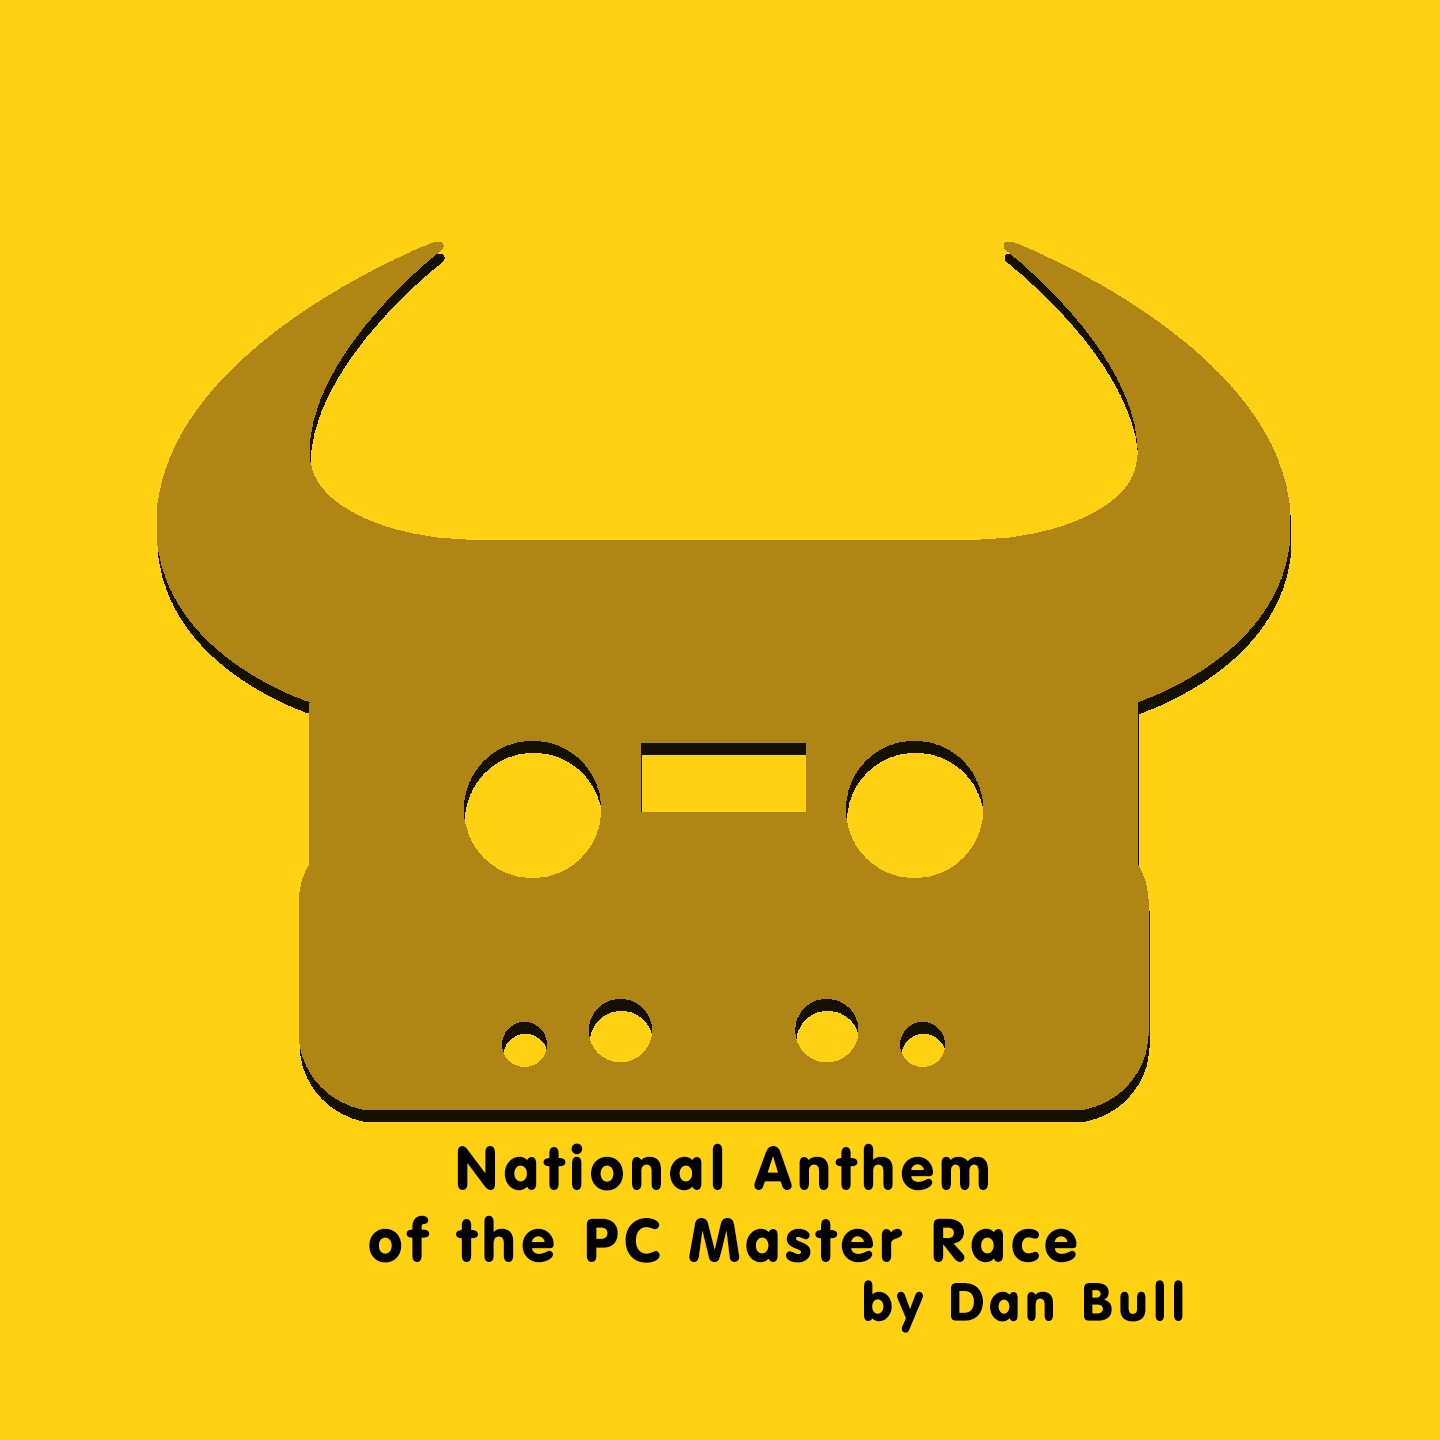 National Anthem of the PC Master Race (YouTube Cut)